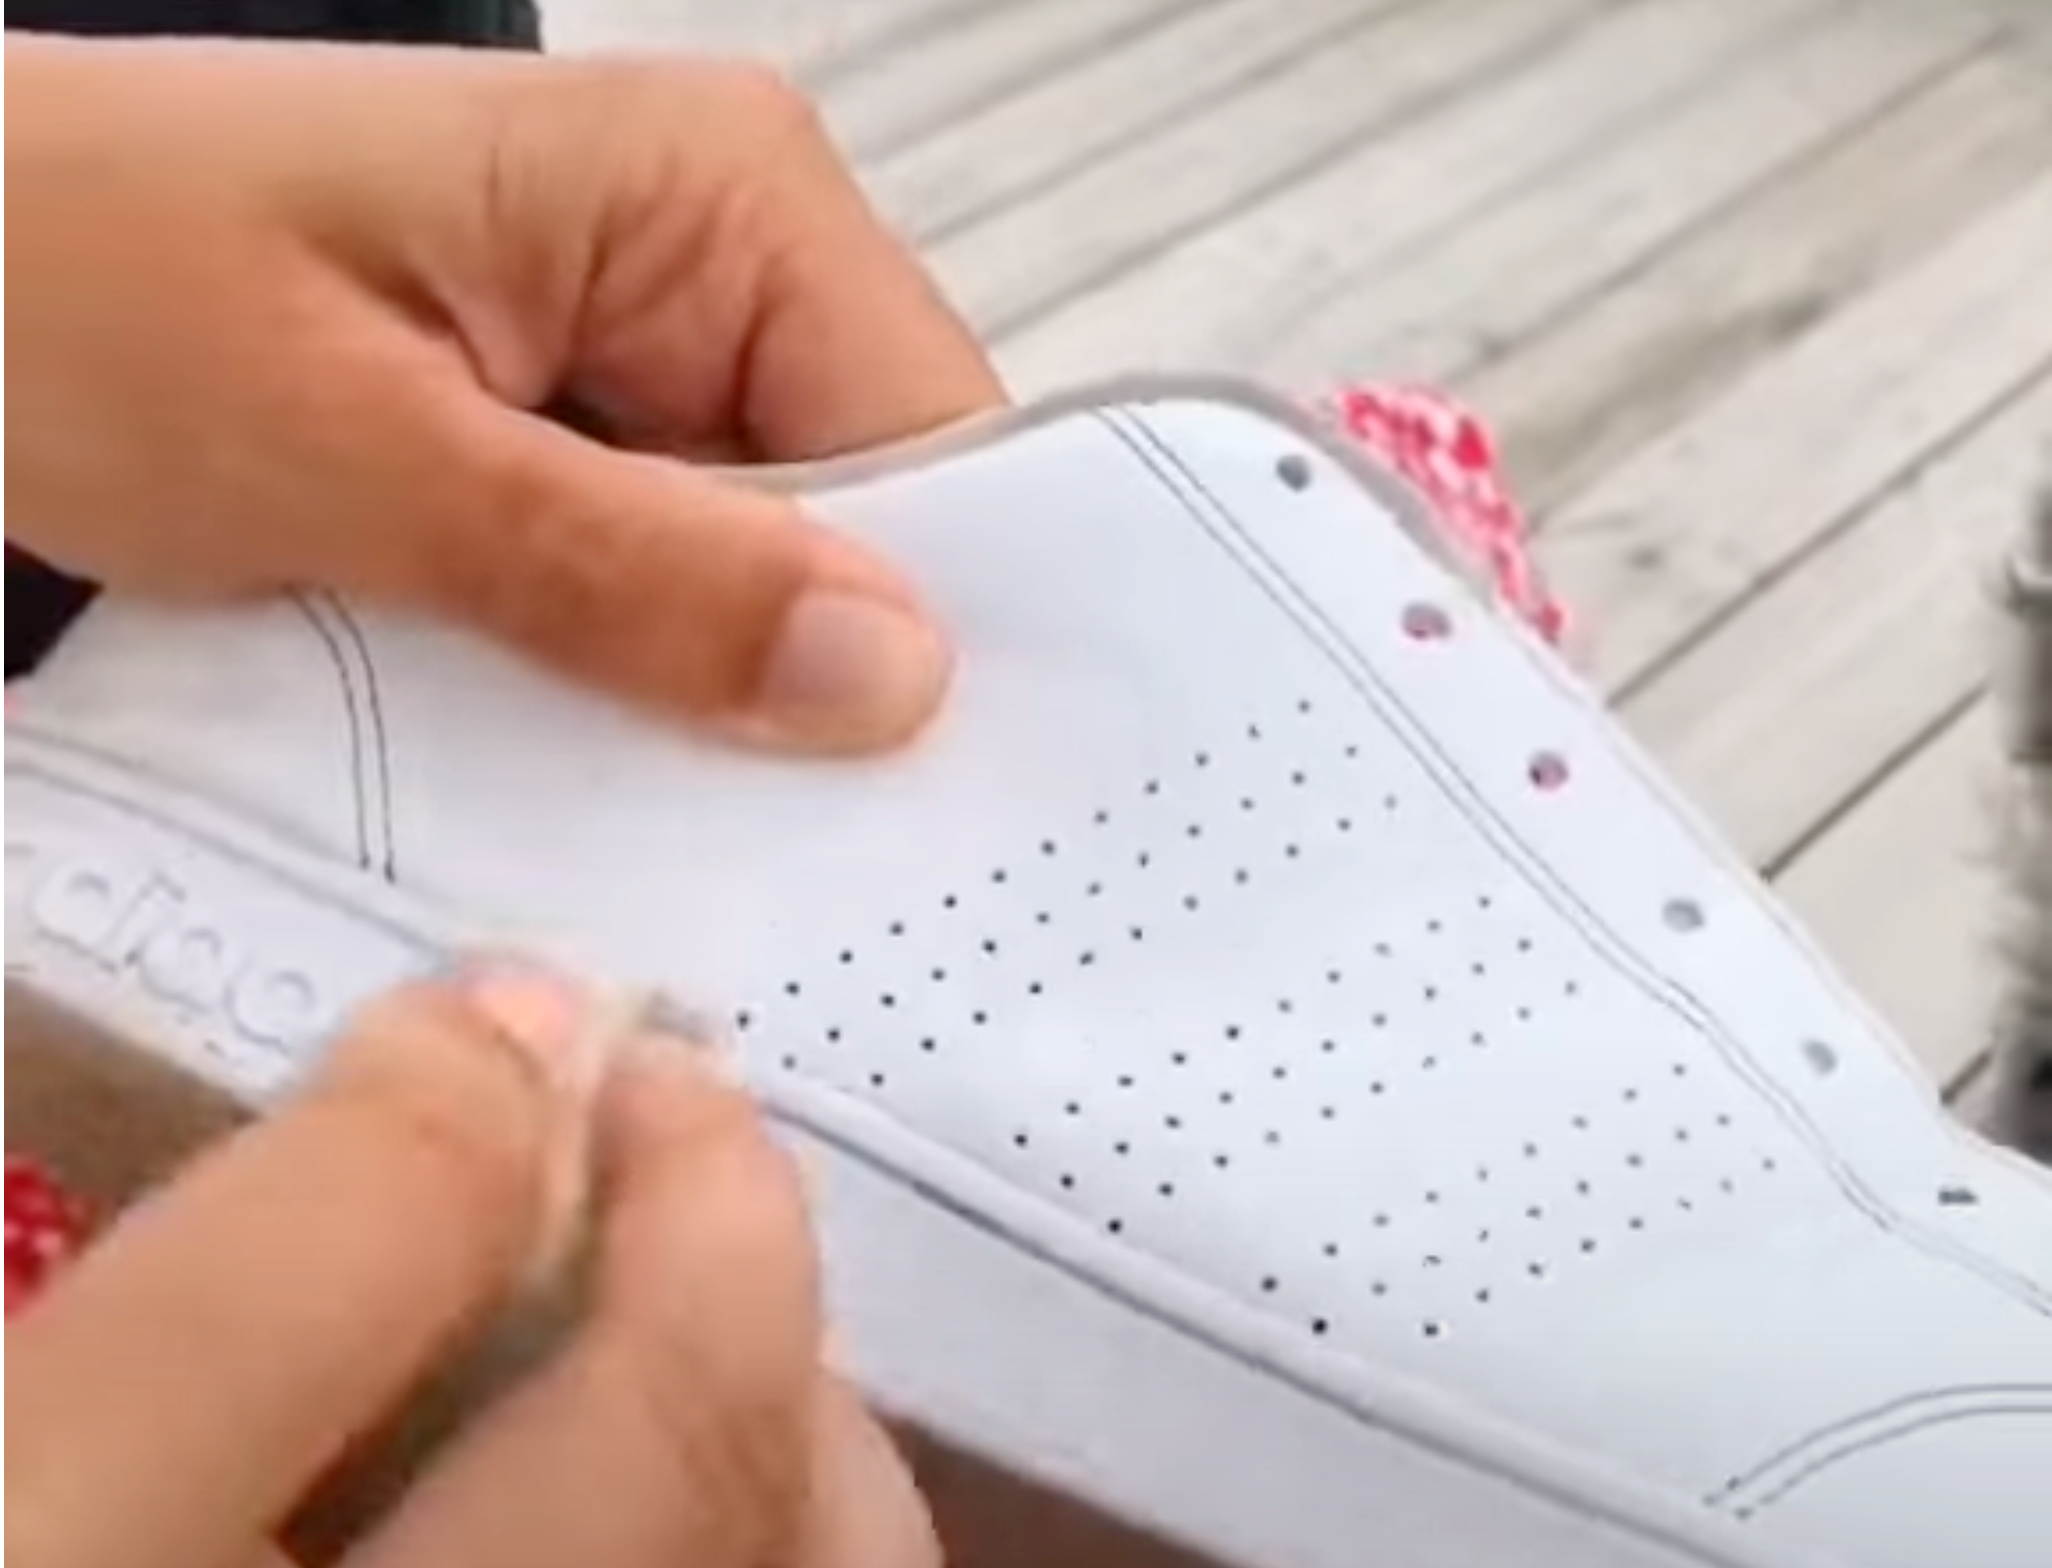 Load video: Demonstration how to make white shoe soles look like new again with shoe polish